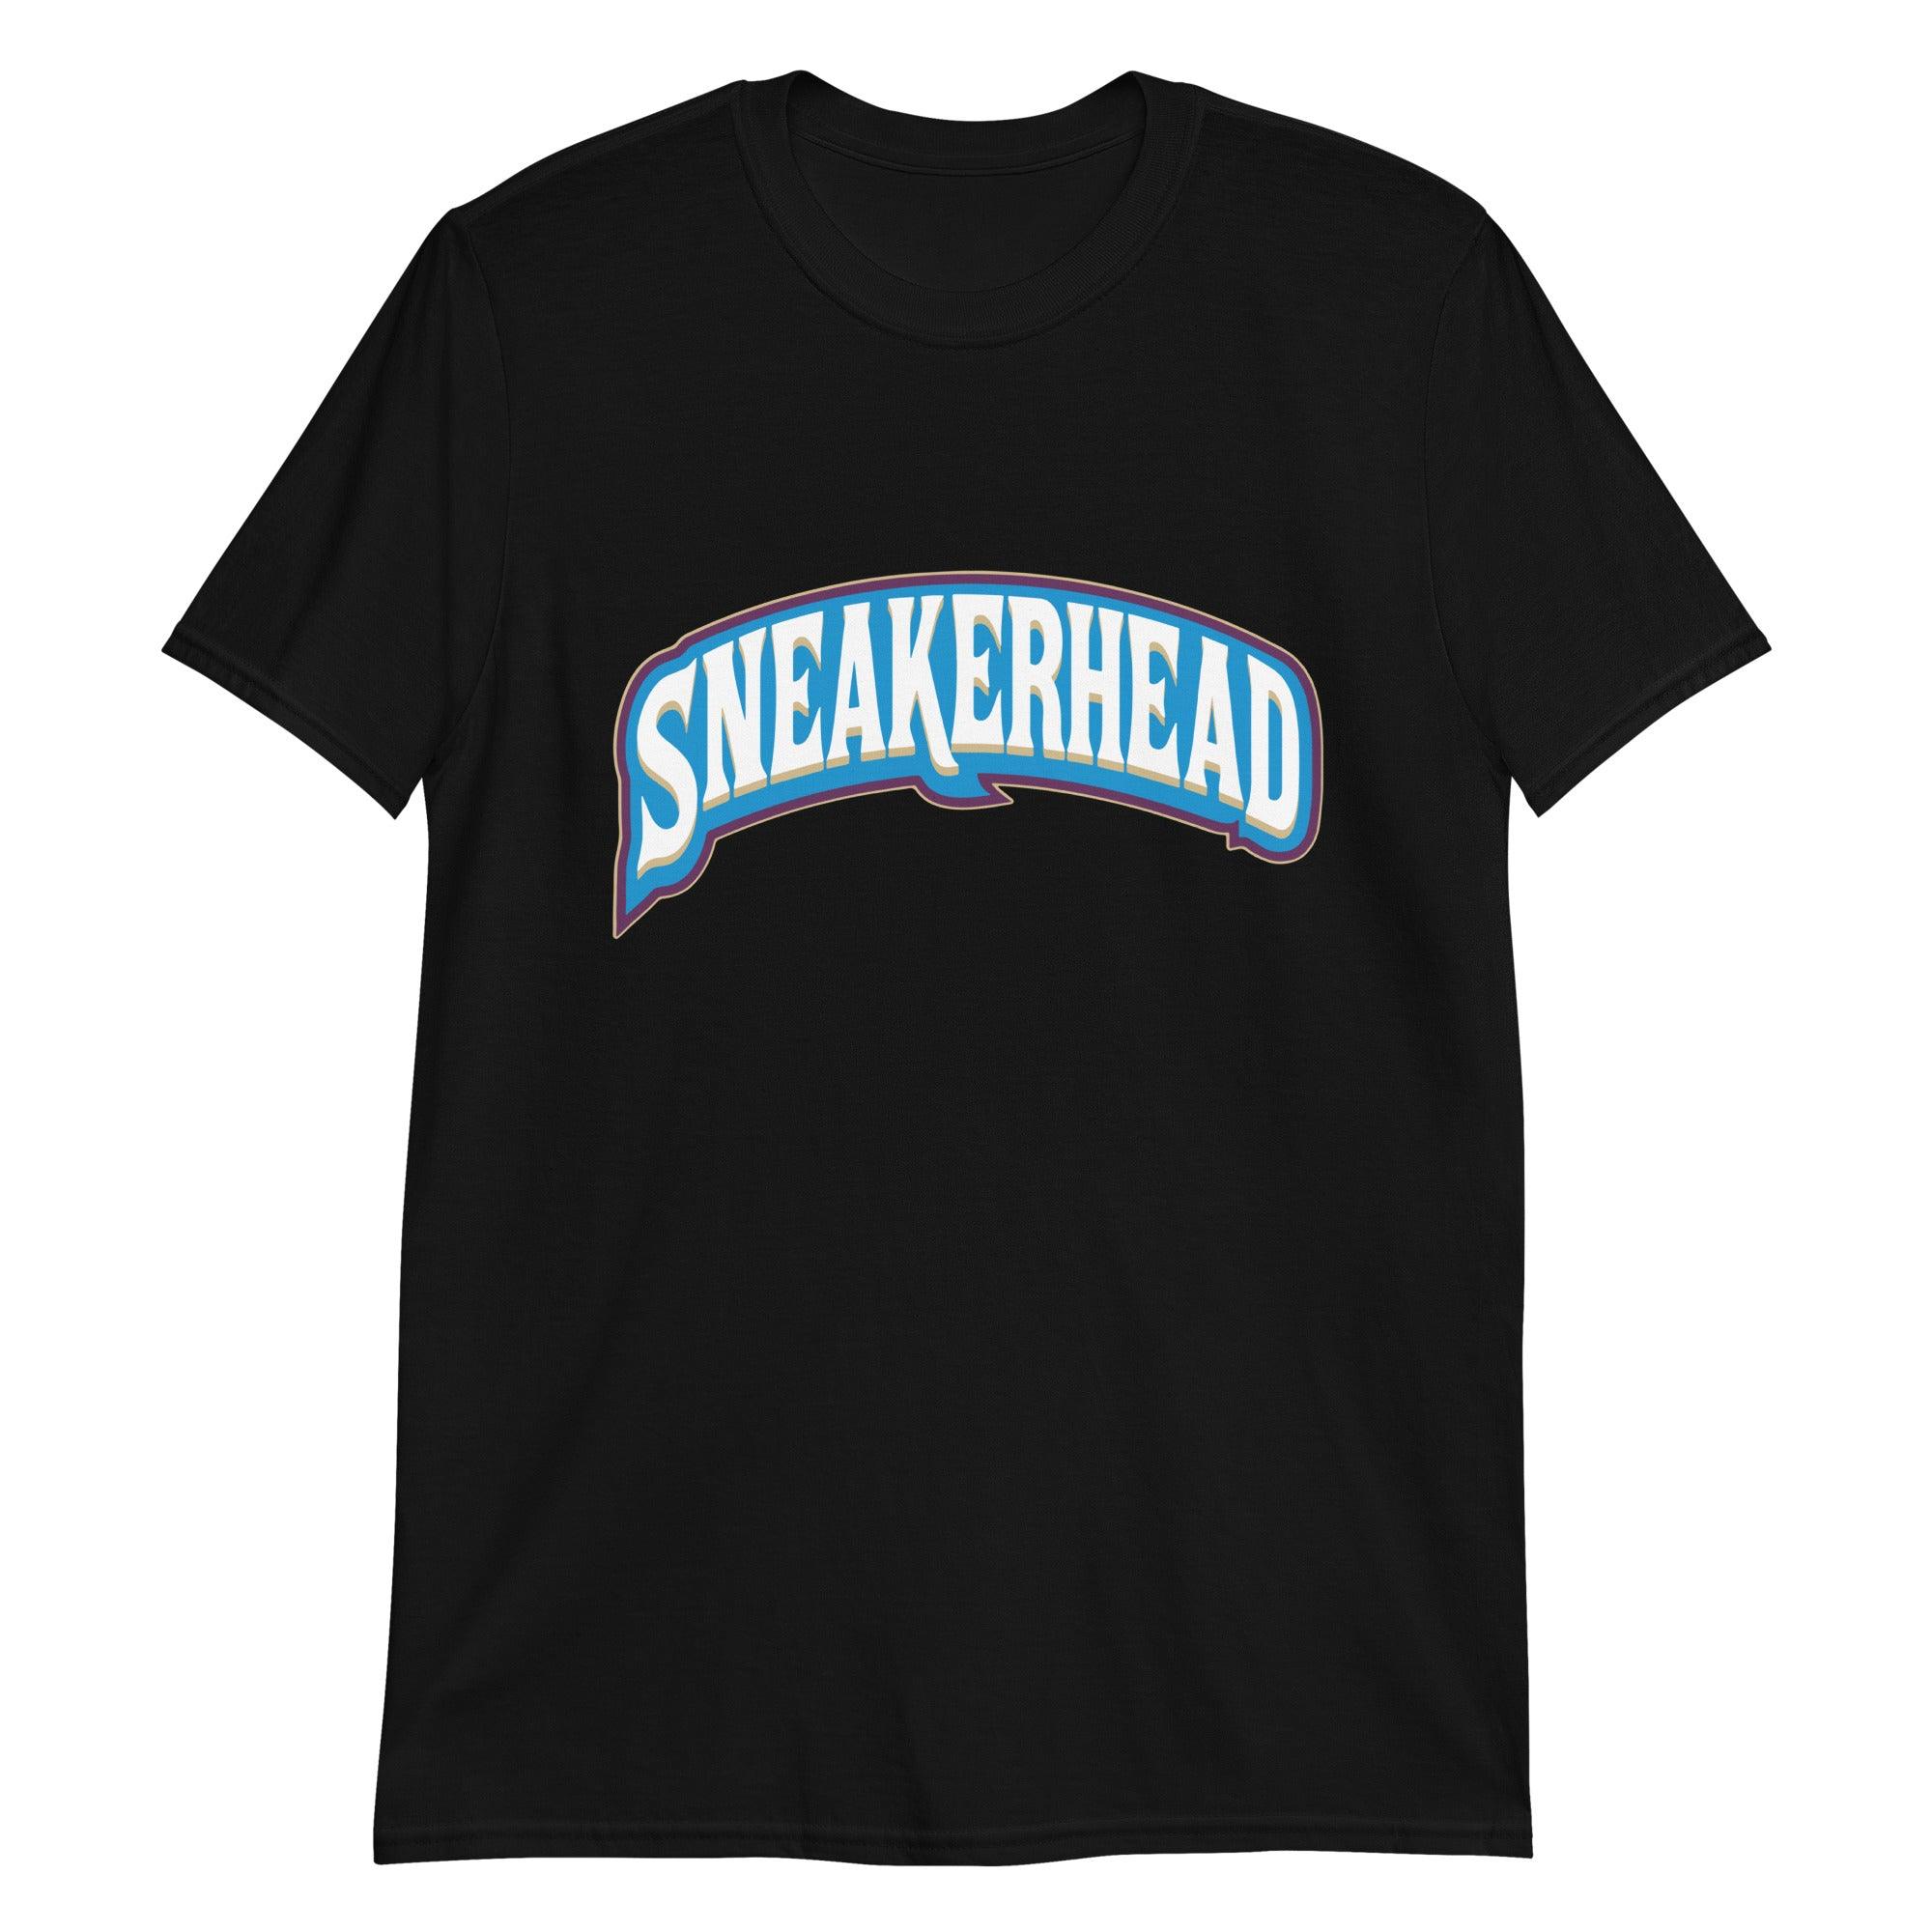 Black Sneakerhead Shirt Dunk Low Undefeated 5 On It Dunk vs AF1 photo